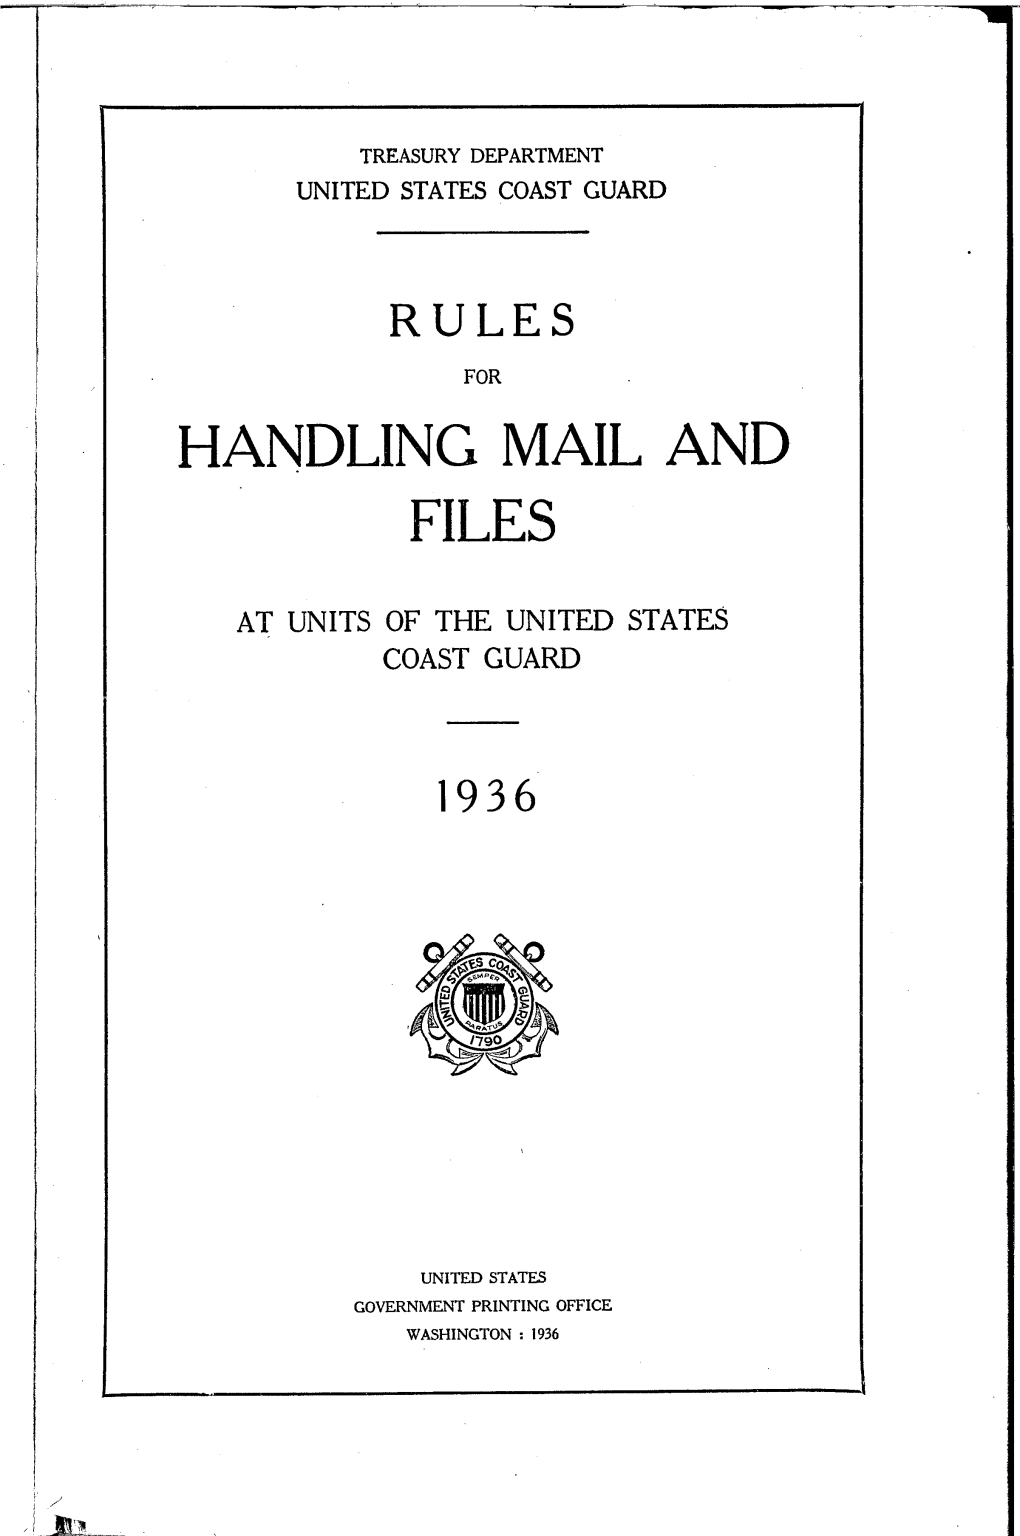 Handling Mail and Files